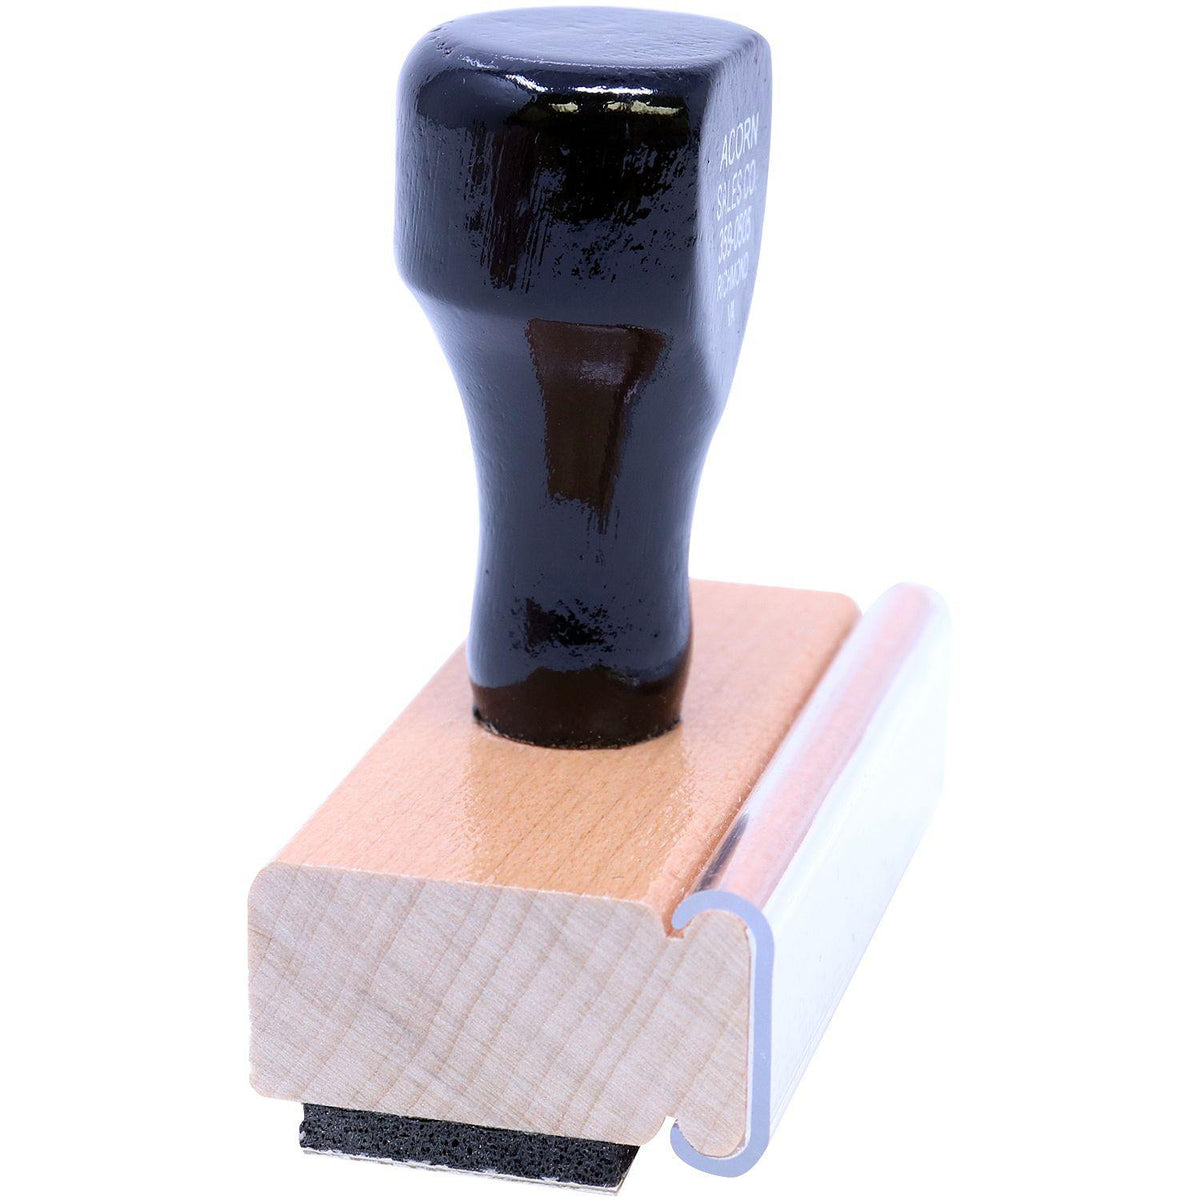 Side View of Large Bold Fragile Rubber Stamp at an Angle